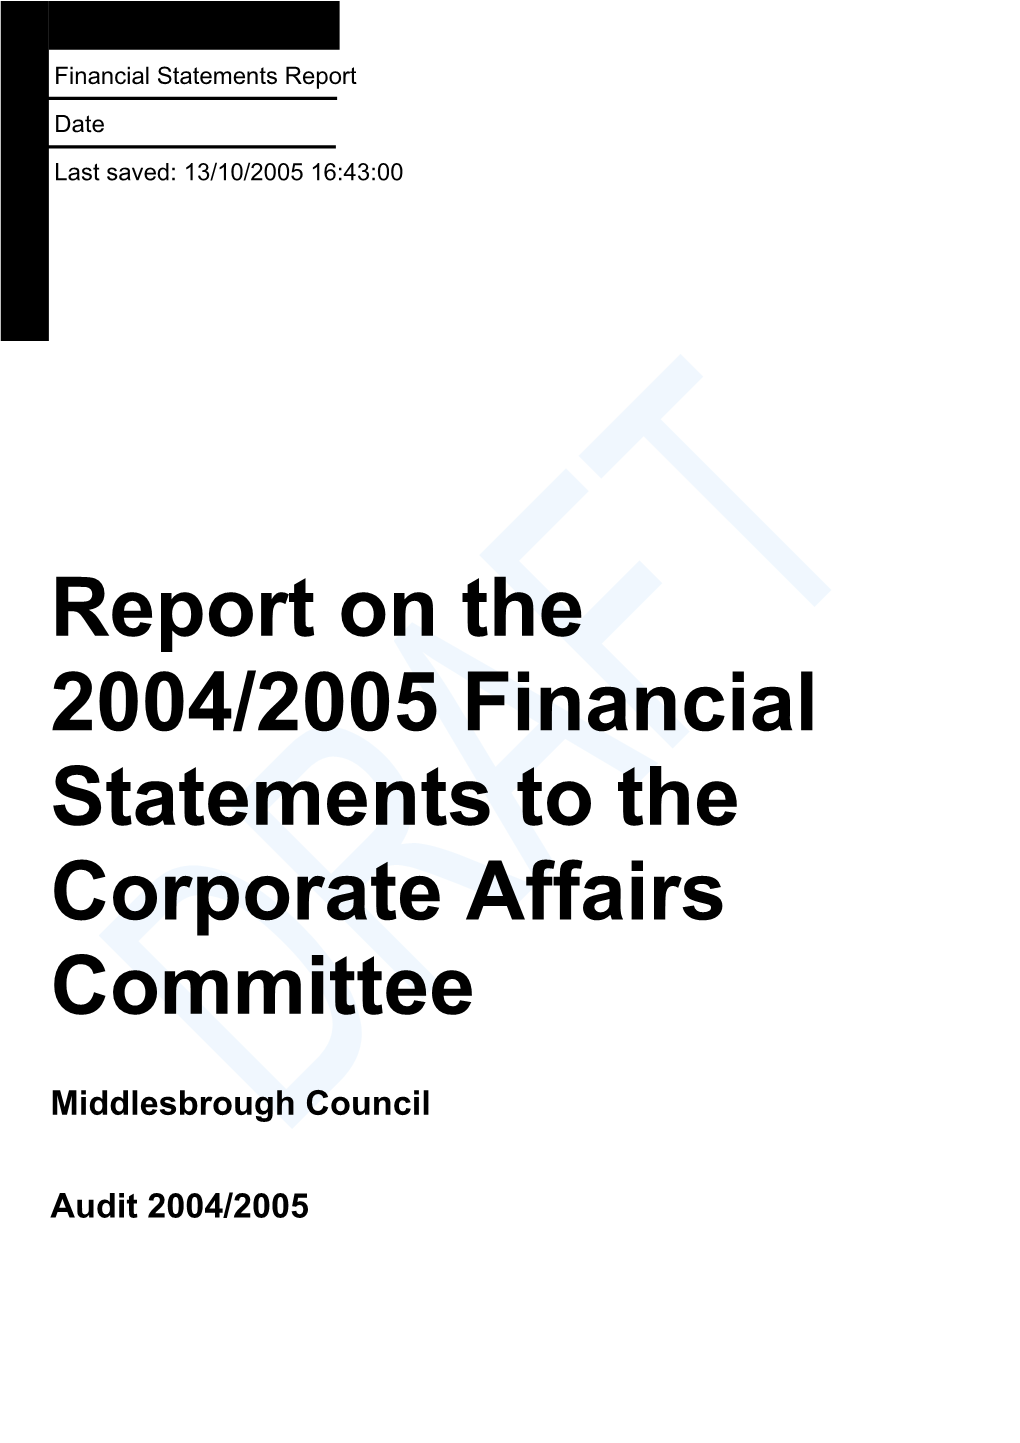 Report on the 2004/2005 Financial Statements to the Corporate Affairs Committee